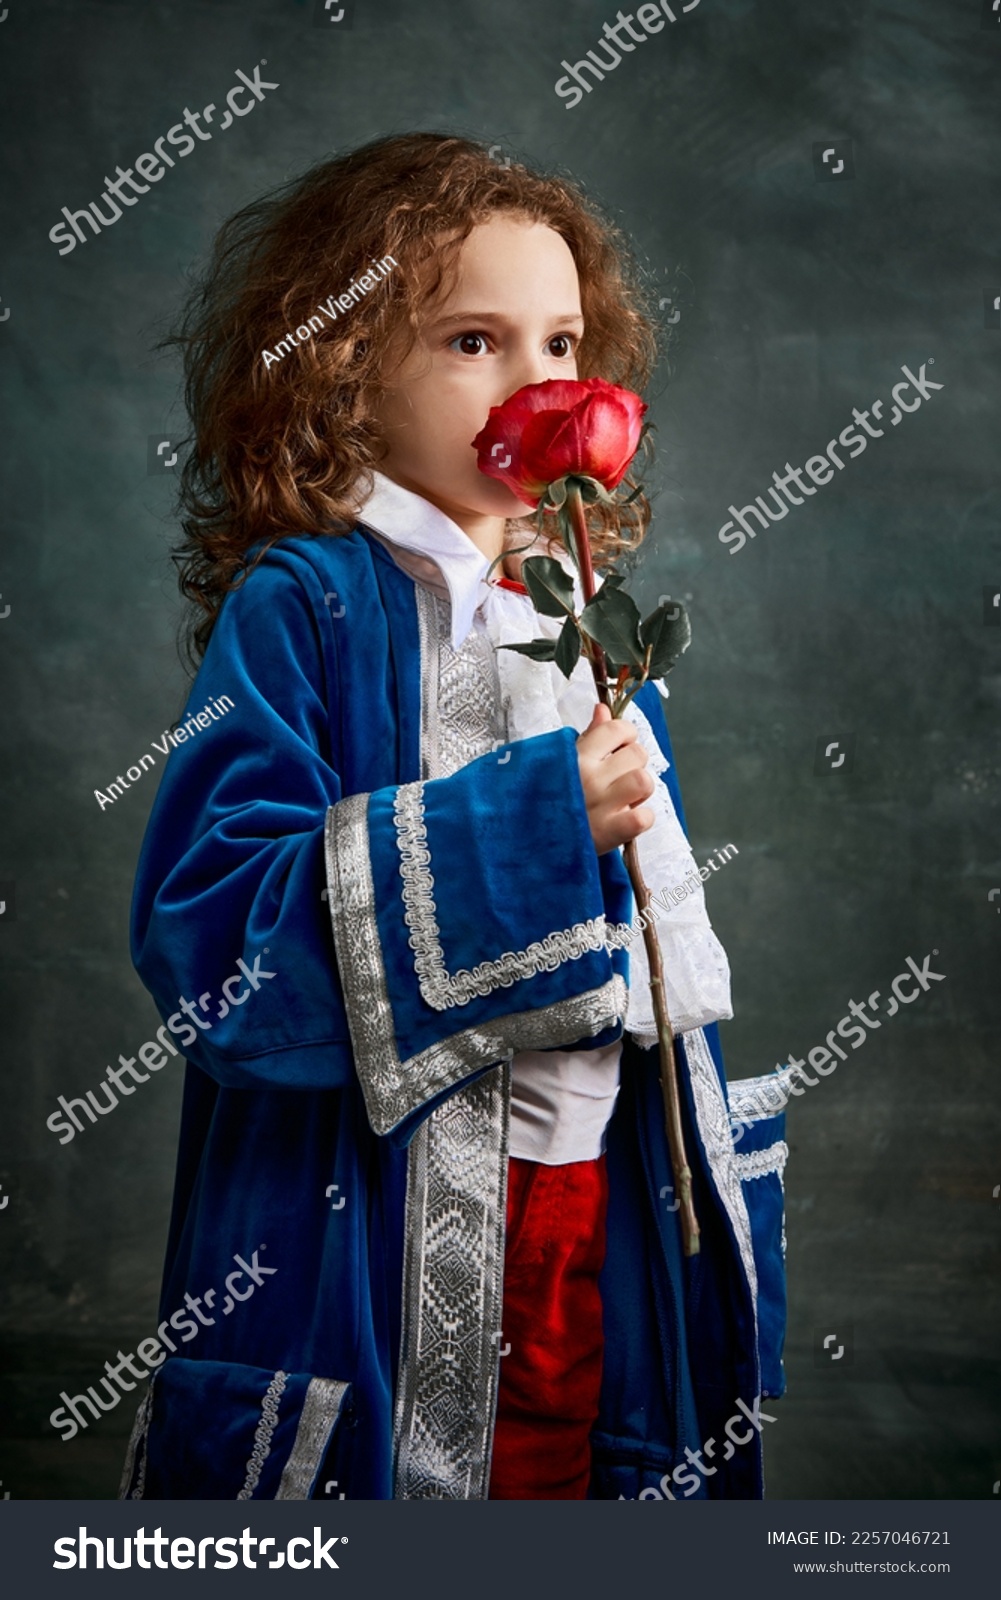 Cinematic portair of beautiful little girl dressed up as medieval knight, little prince over dark vintage style background, Fashion, beauty, emotions, theater concept. Eras comparison #2257046721